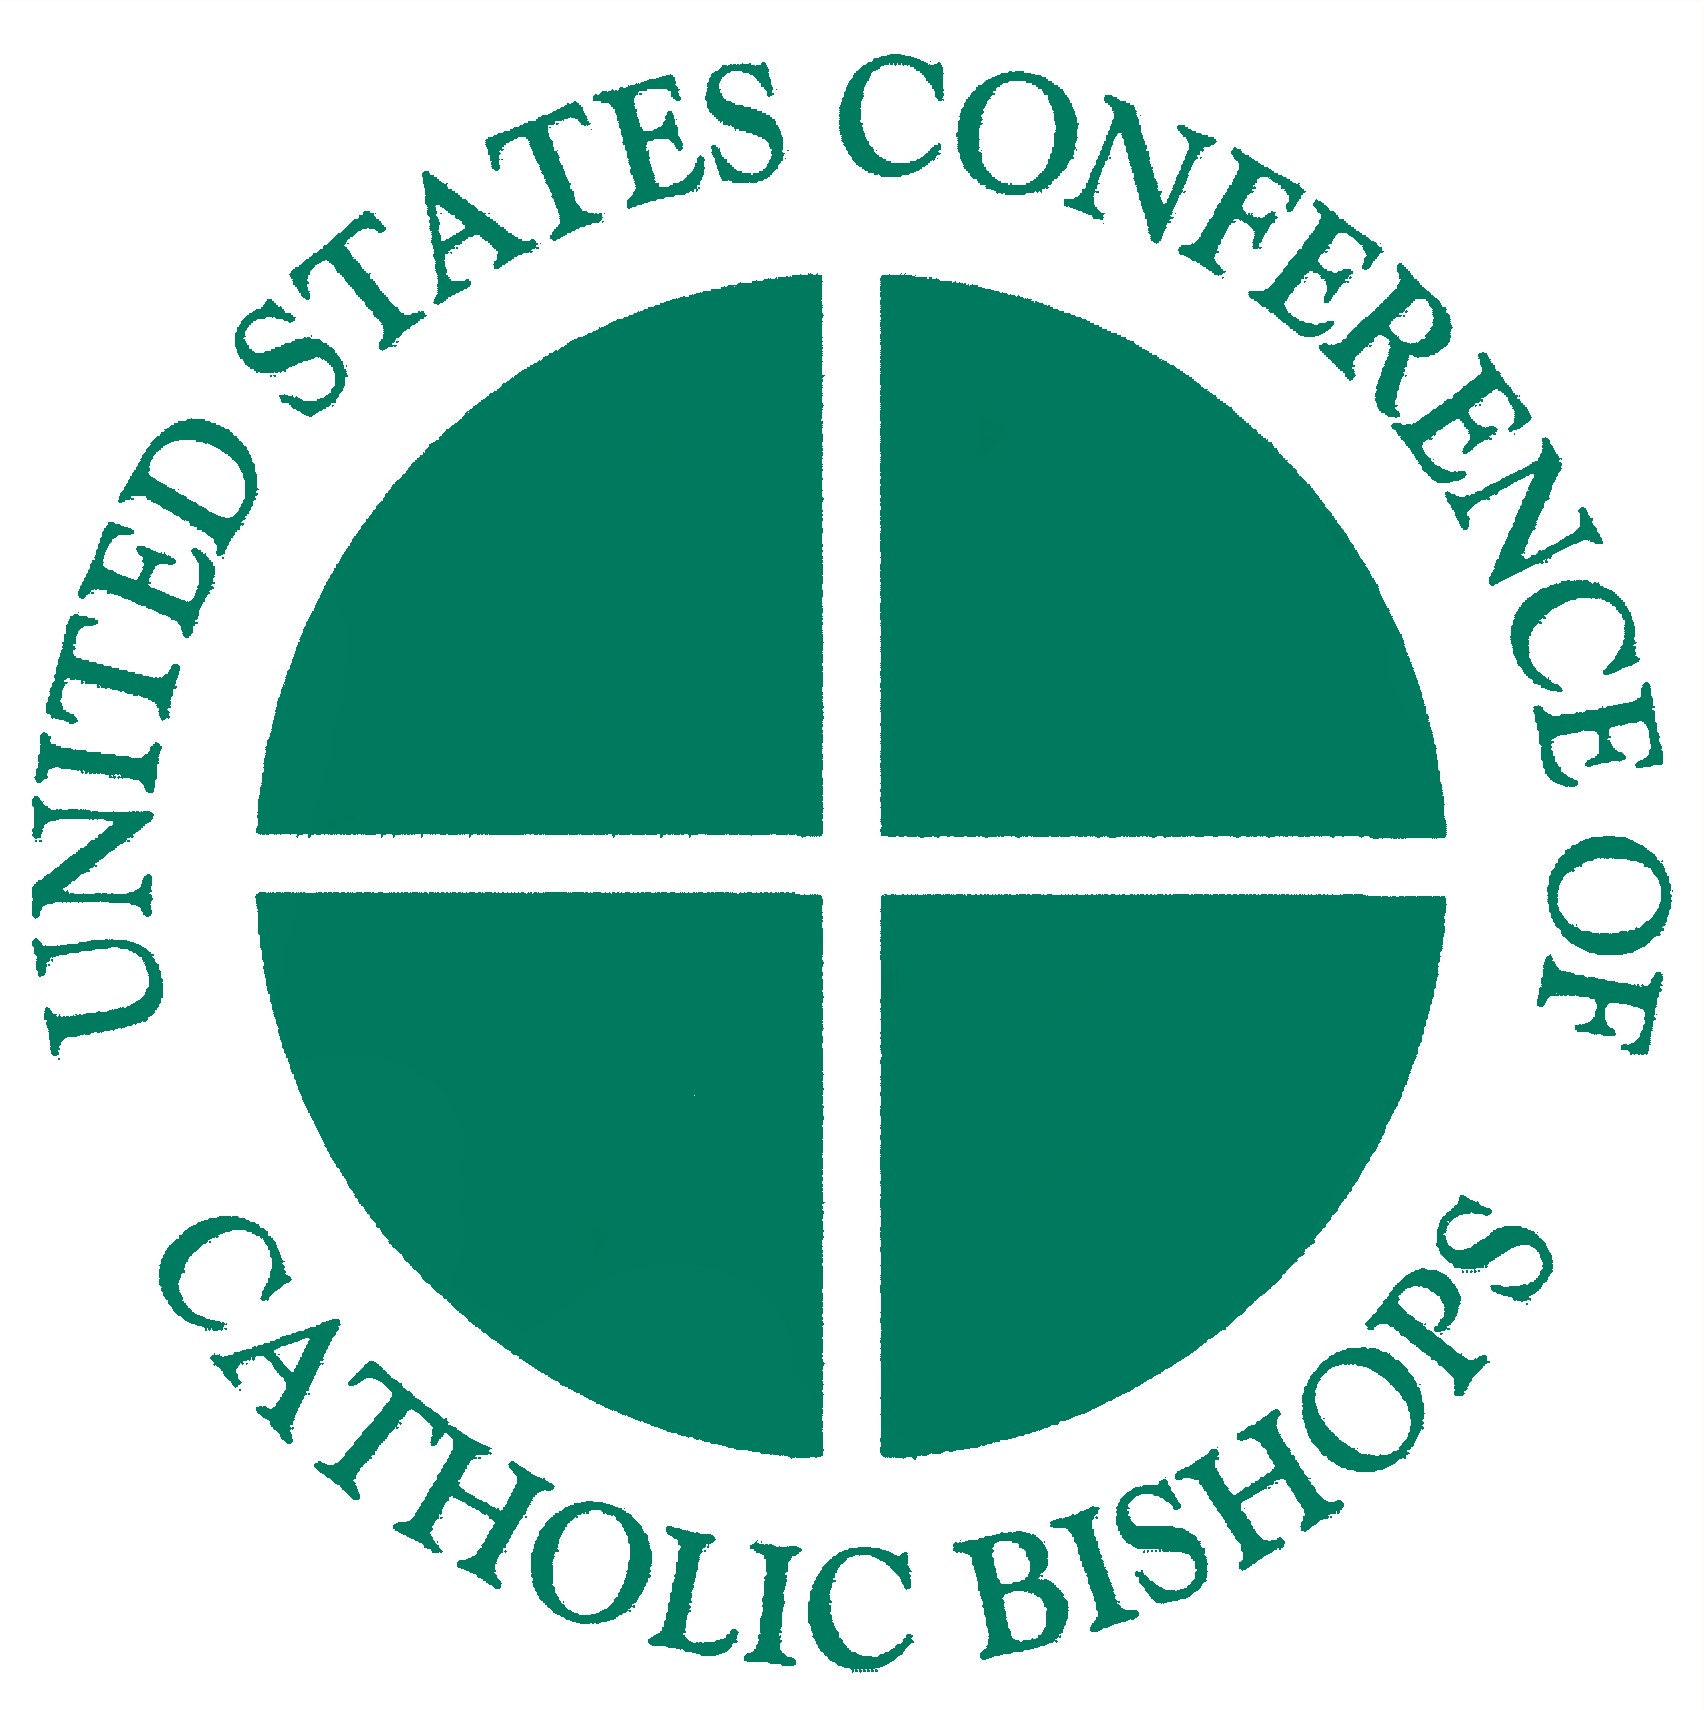 usccb daily readings 2022